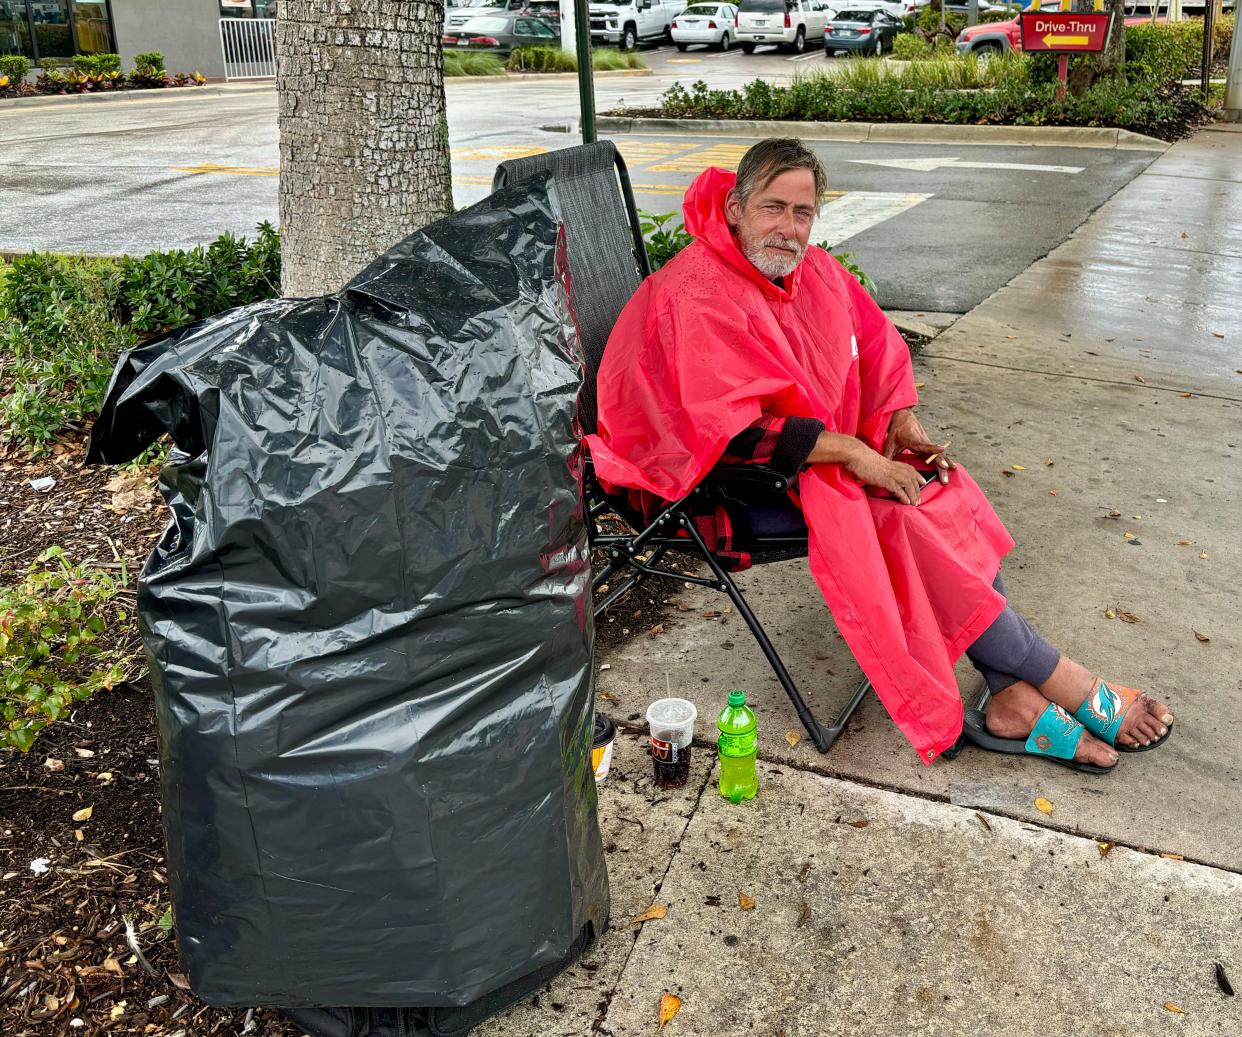 West Palm Beach's Kelly Perkins says he has been homeless for four years and a sidewalk on Belvedere Road is his permanent home.